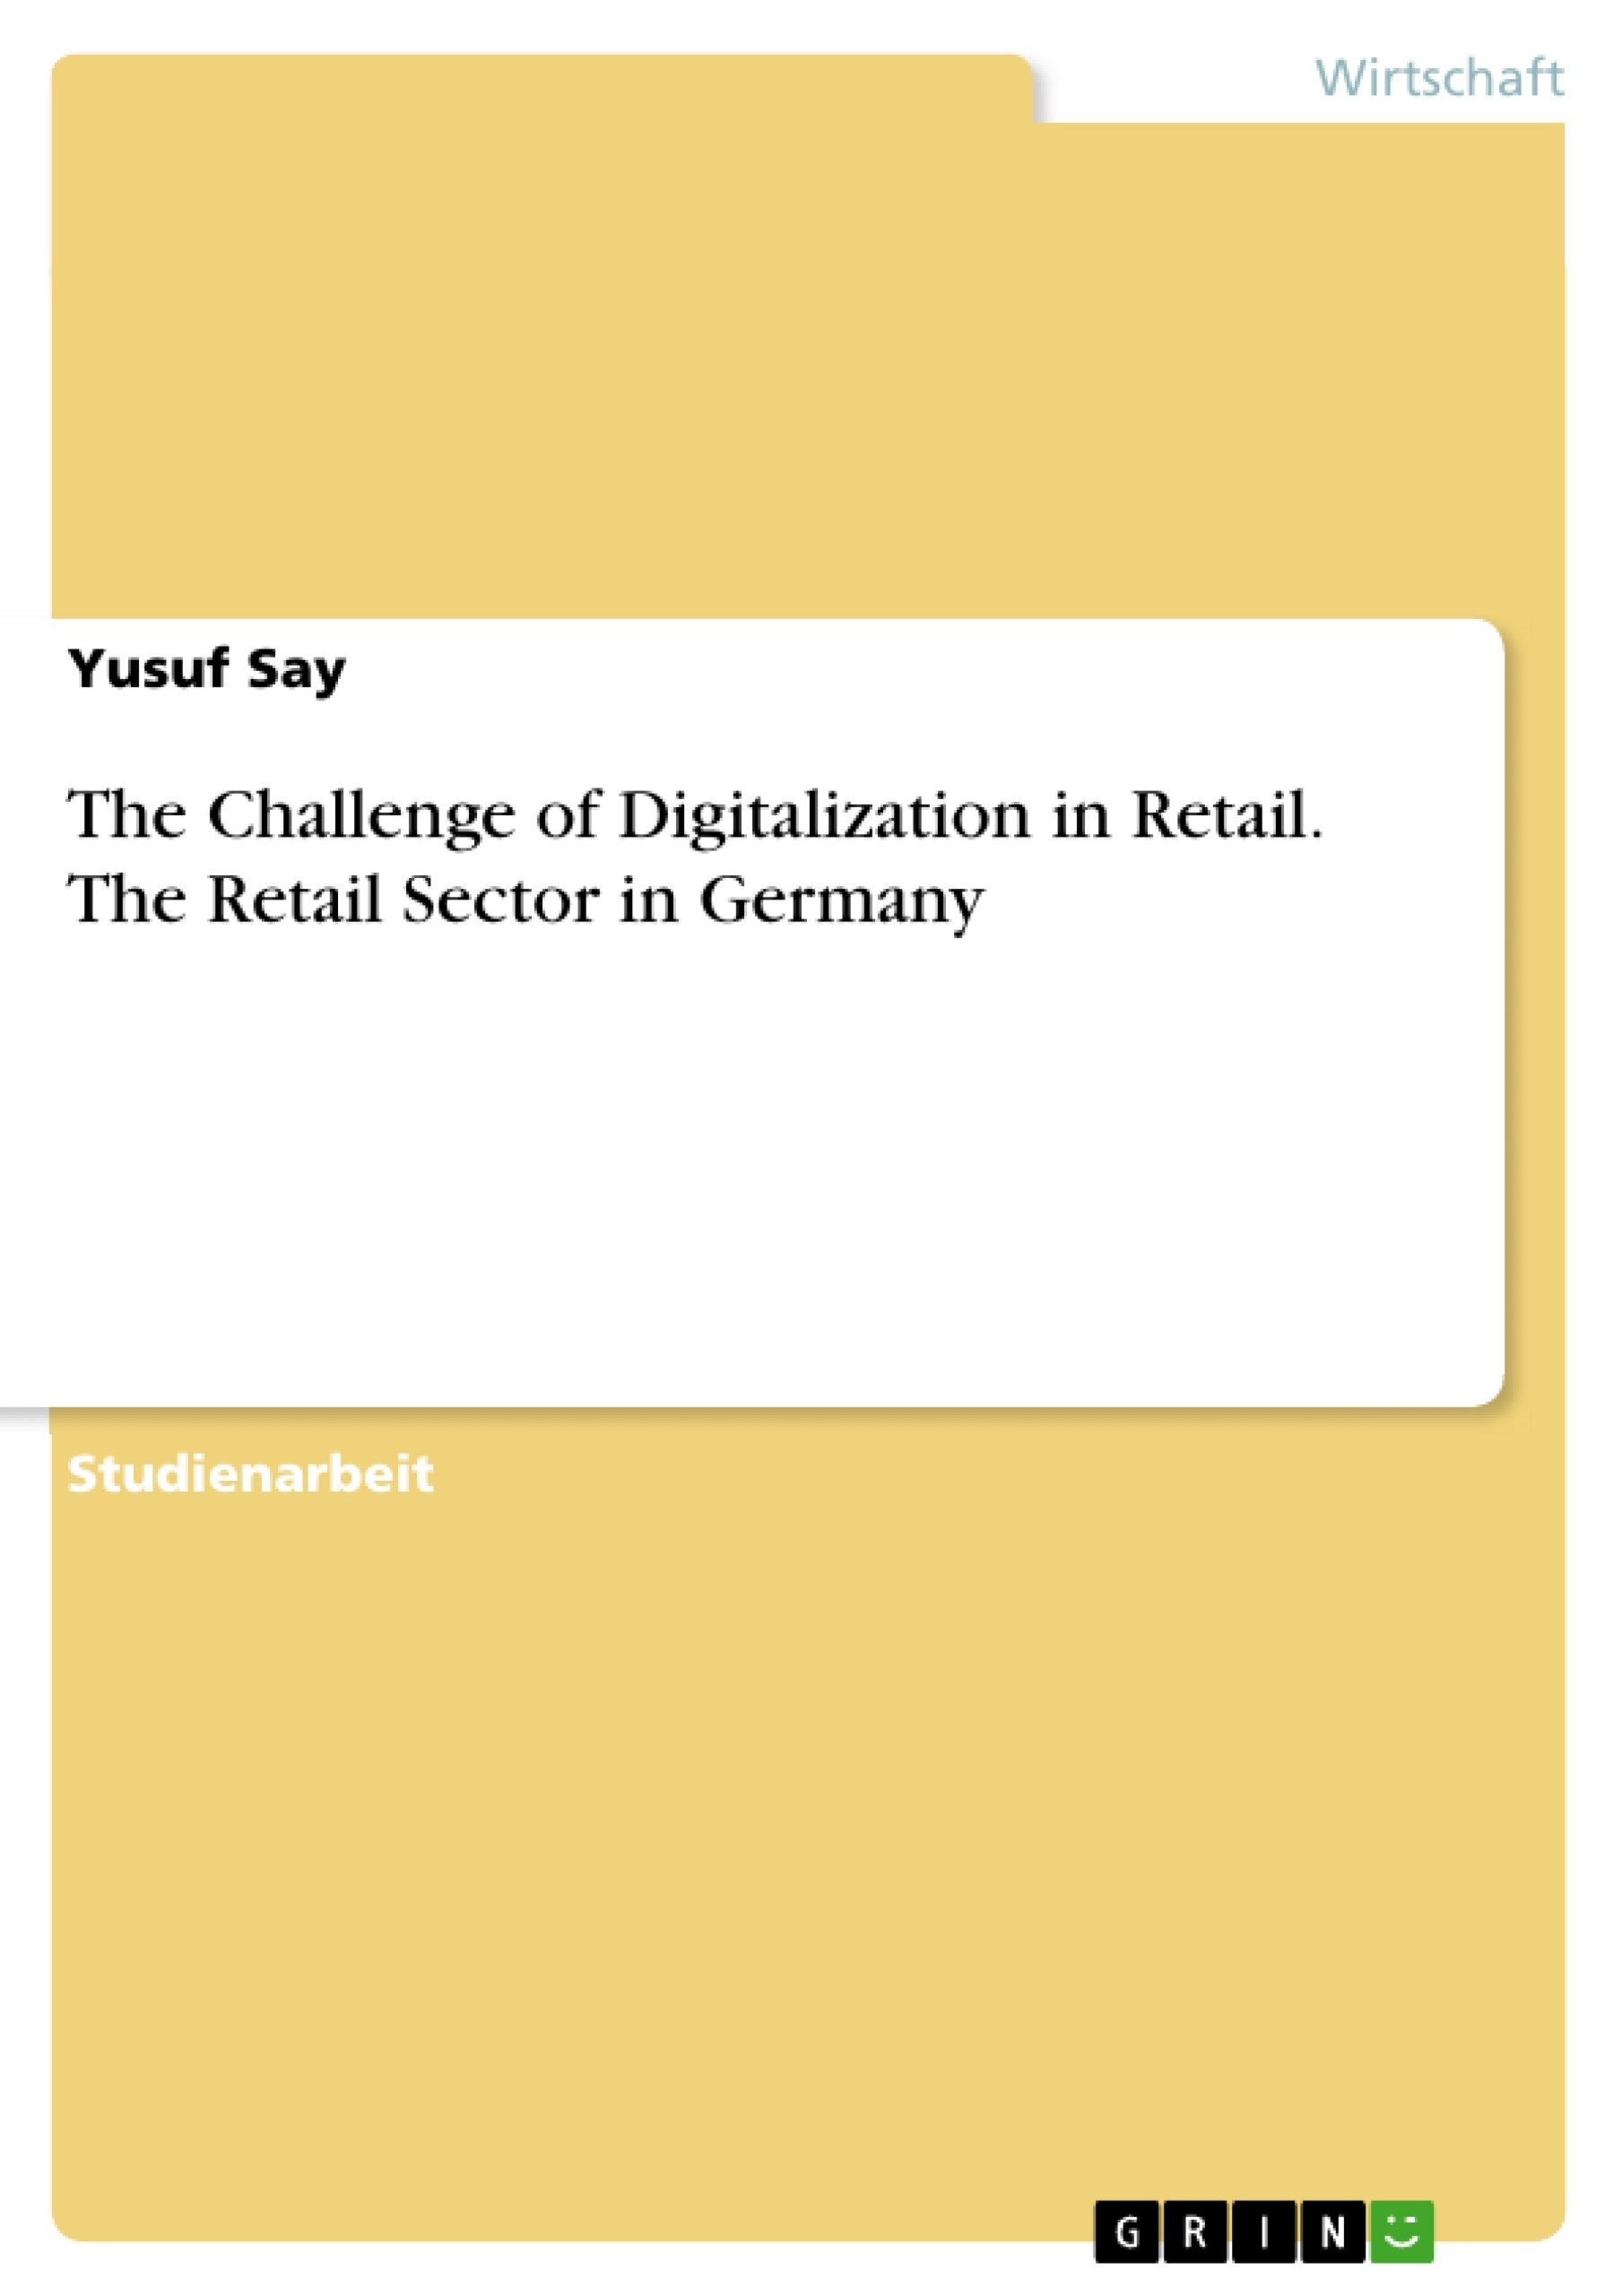 Titel: The Challenge of Digitalization in Retail. The Retail Sector in Germany